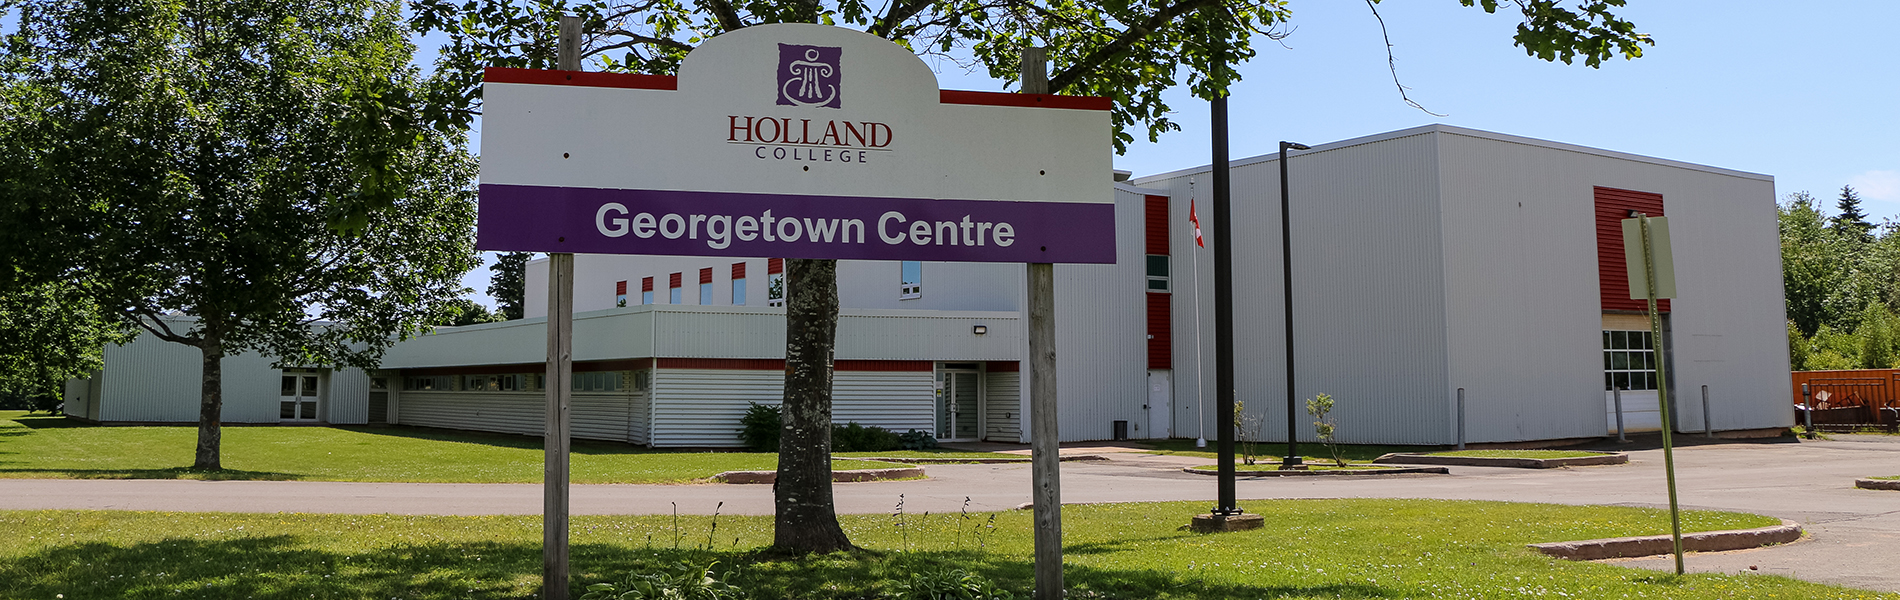 Georgetown Centre banner image